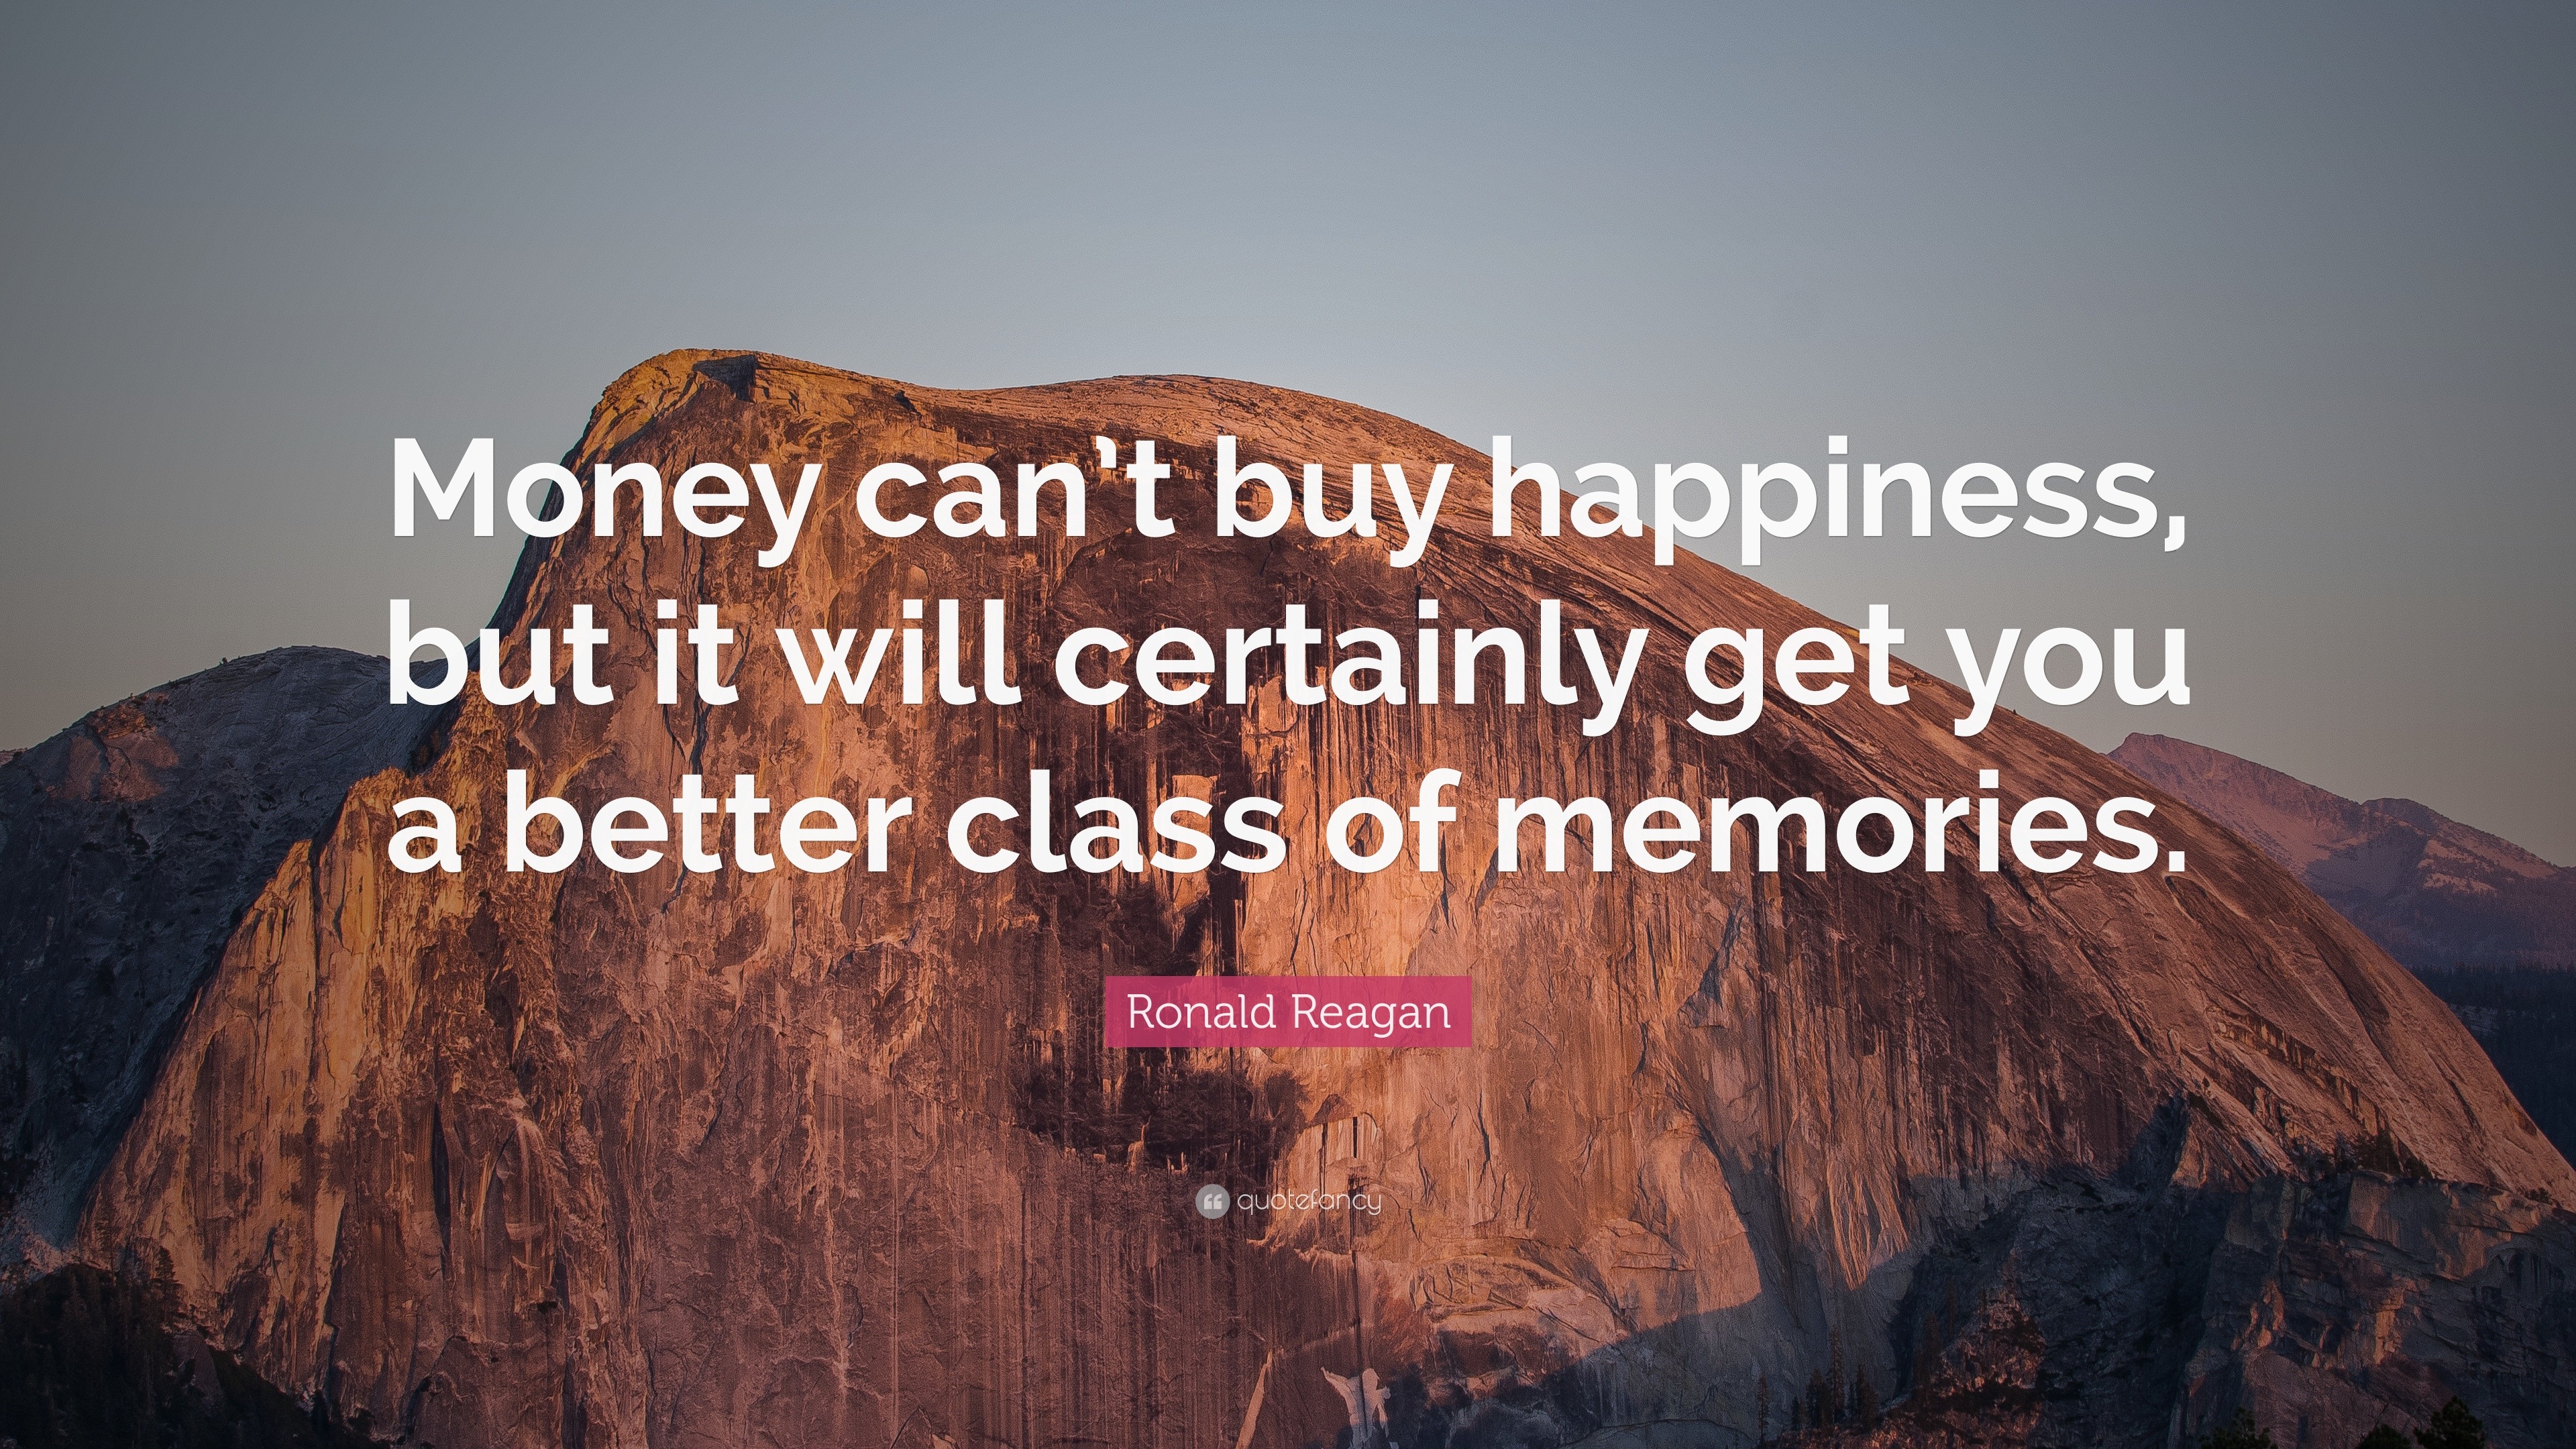 Ronald Reagan Quote: “Money can’t buy happiness, but it will certainly